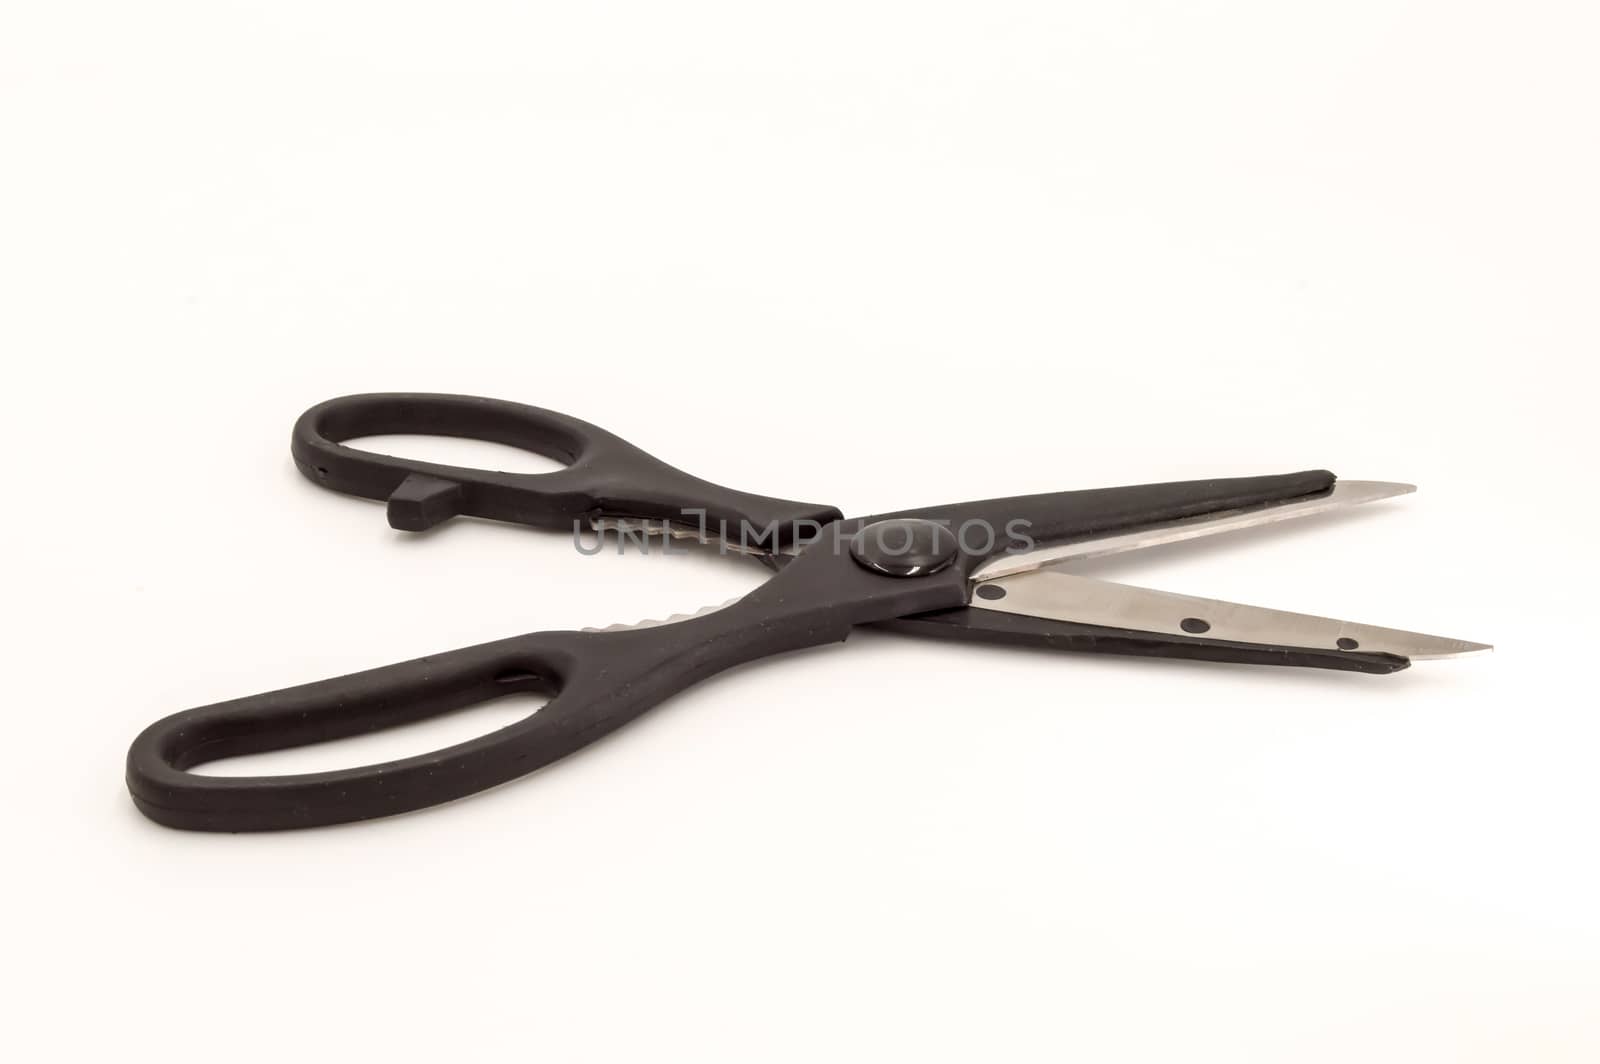 Kitchen scissor with a black handle, isolated on a white background